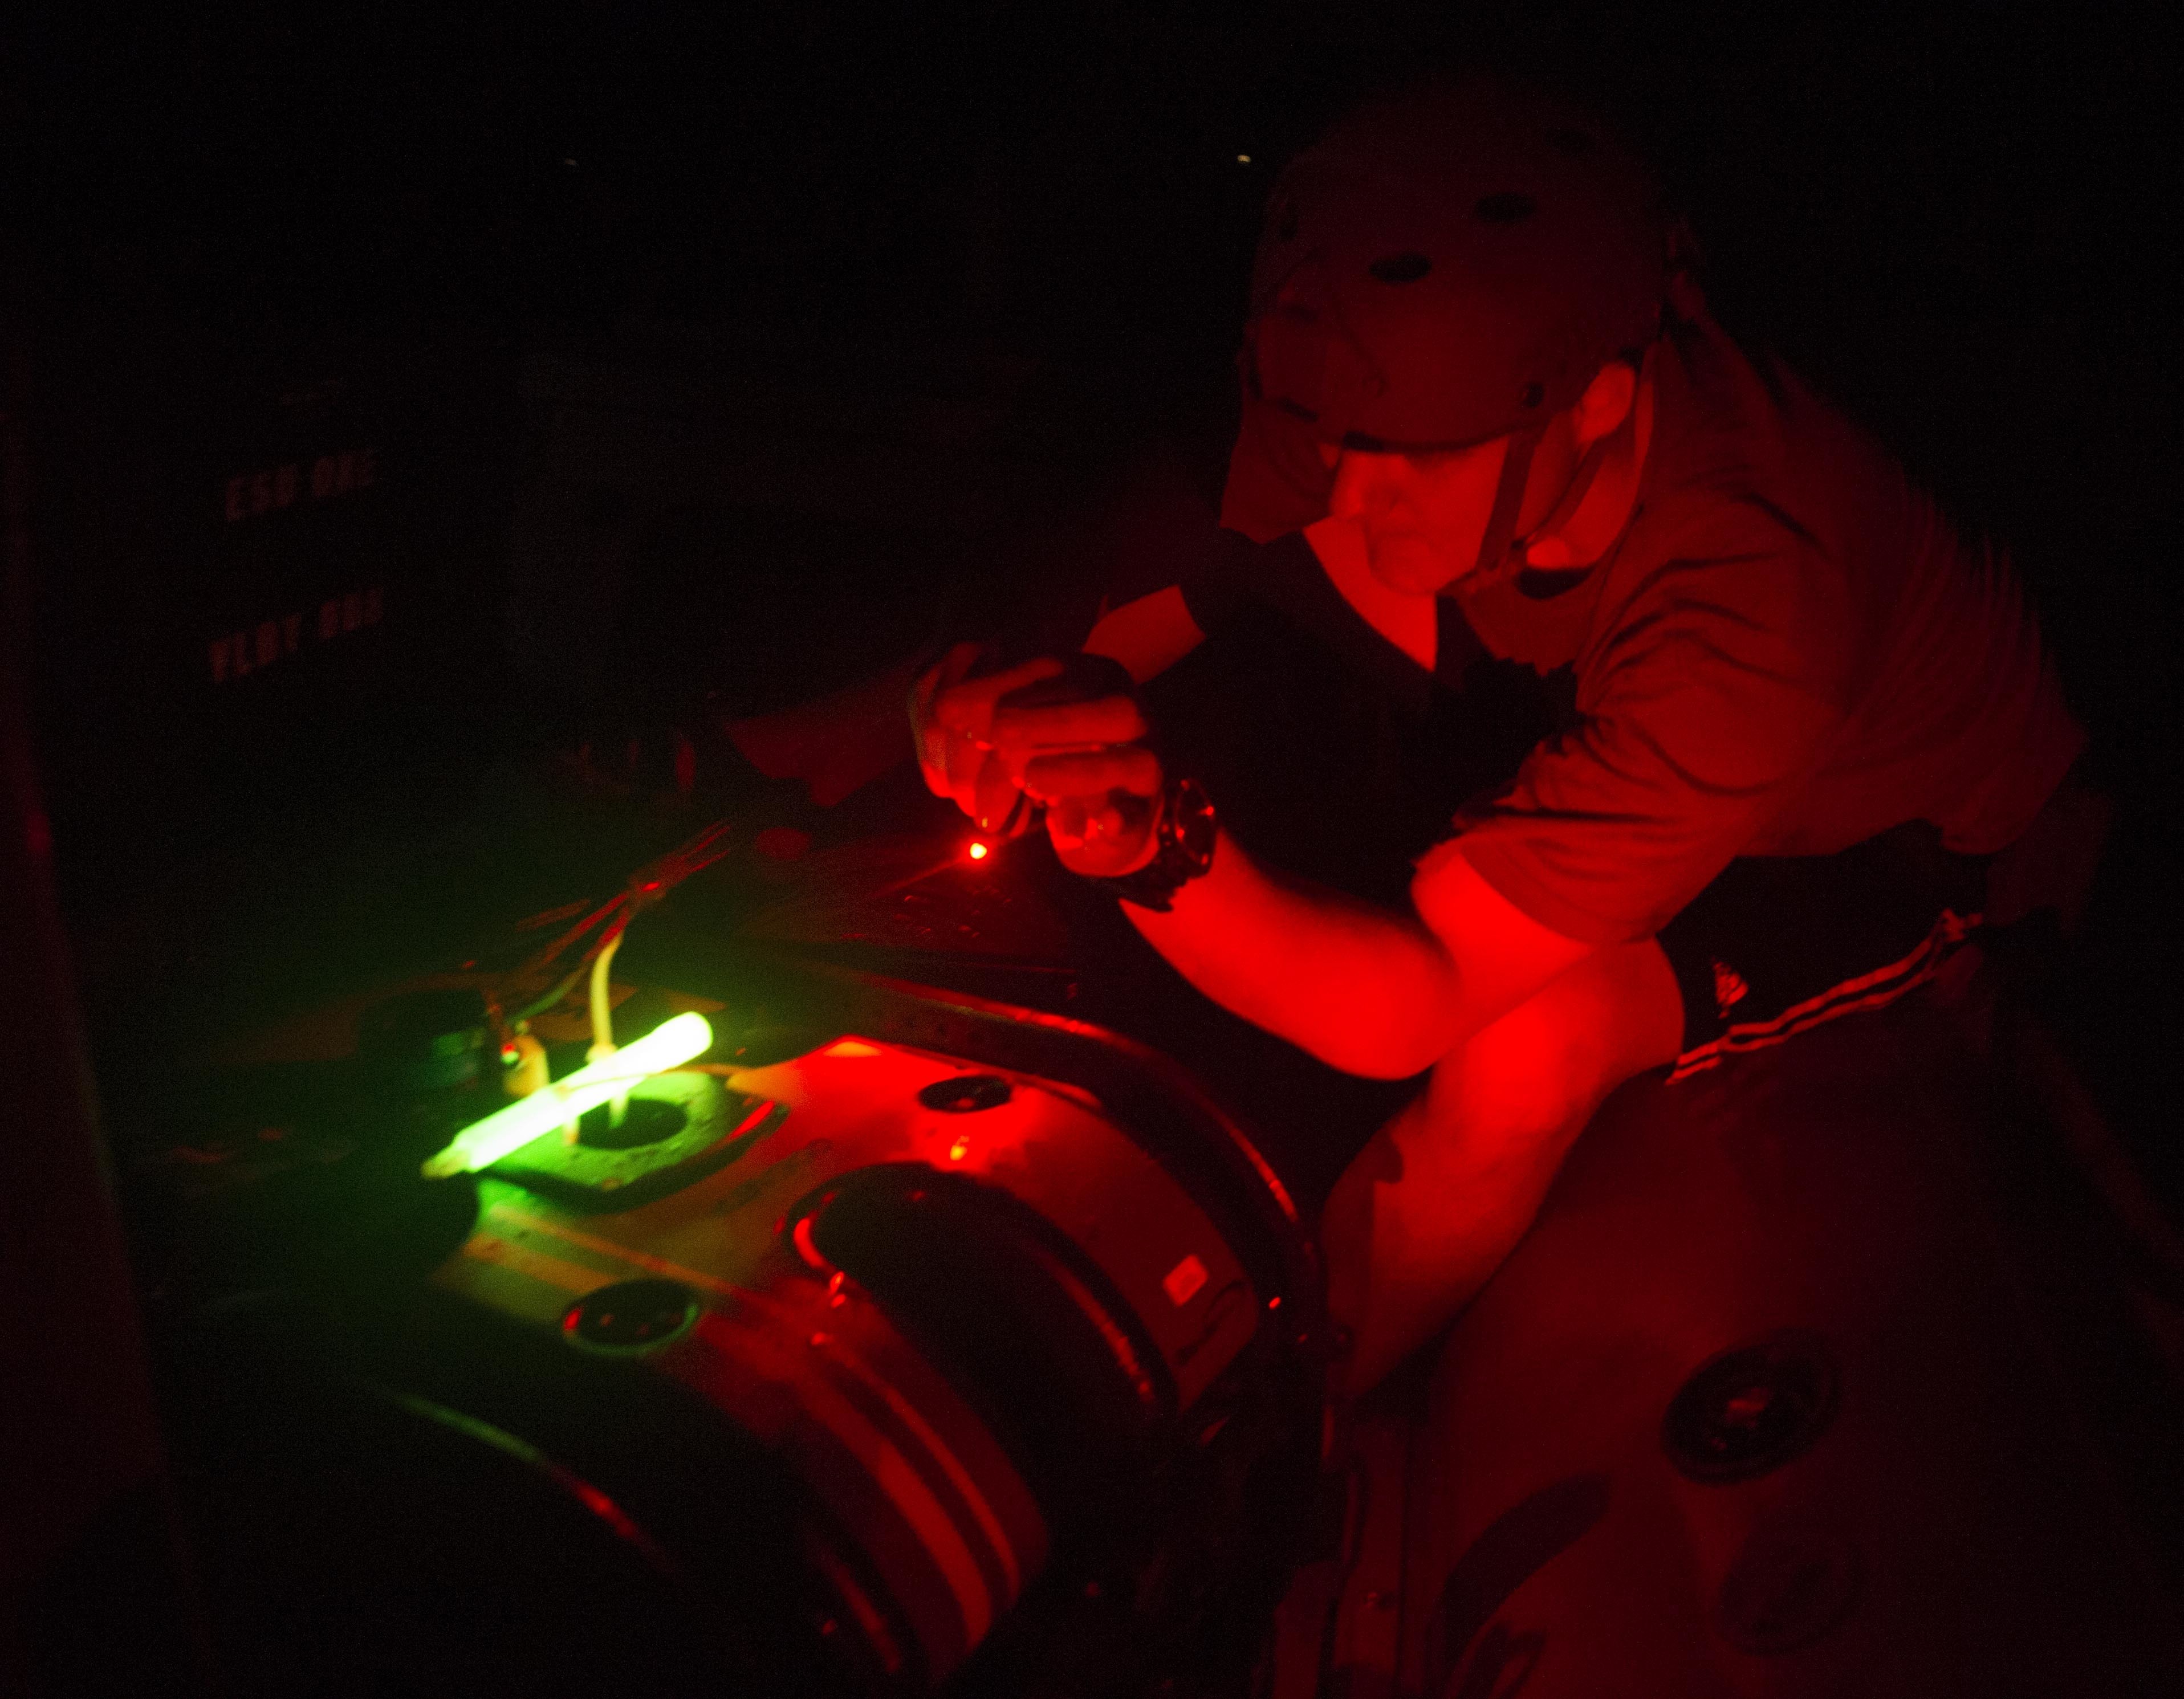 Mineman 3rd Class Brandon Workman, attached to Commander, Task Group 56.1, inspects the Seabotix robot after recovering it from a night dive during the International Mine Countermeasure Exercise (IMCMEX) 16 on April 13, 2016. US Navy Photo